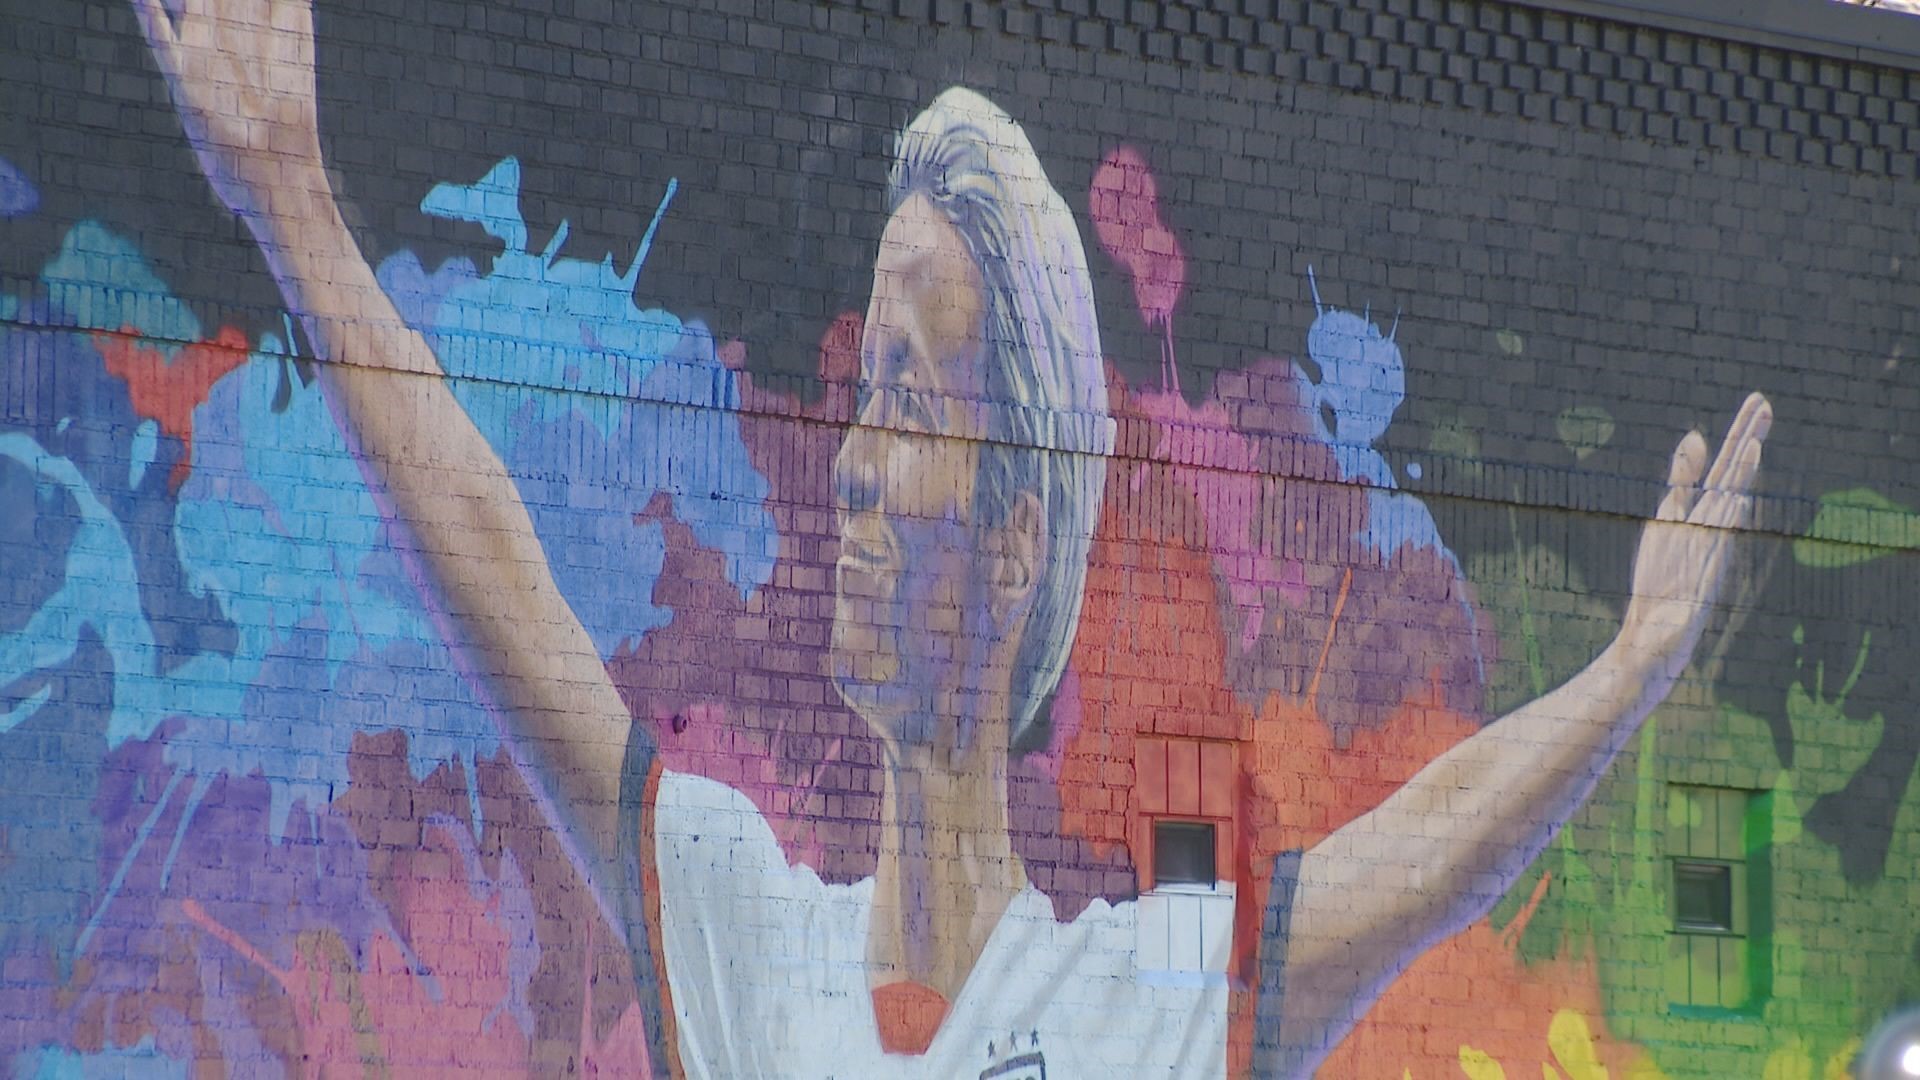 A mural of Megan Rapinoe has been a trendy spot for fans to visit since it went up a few months ago. Now, it’s trending thanks to a visit from the star herself.